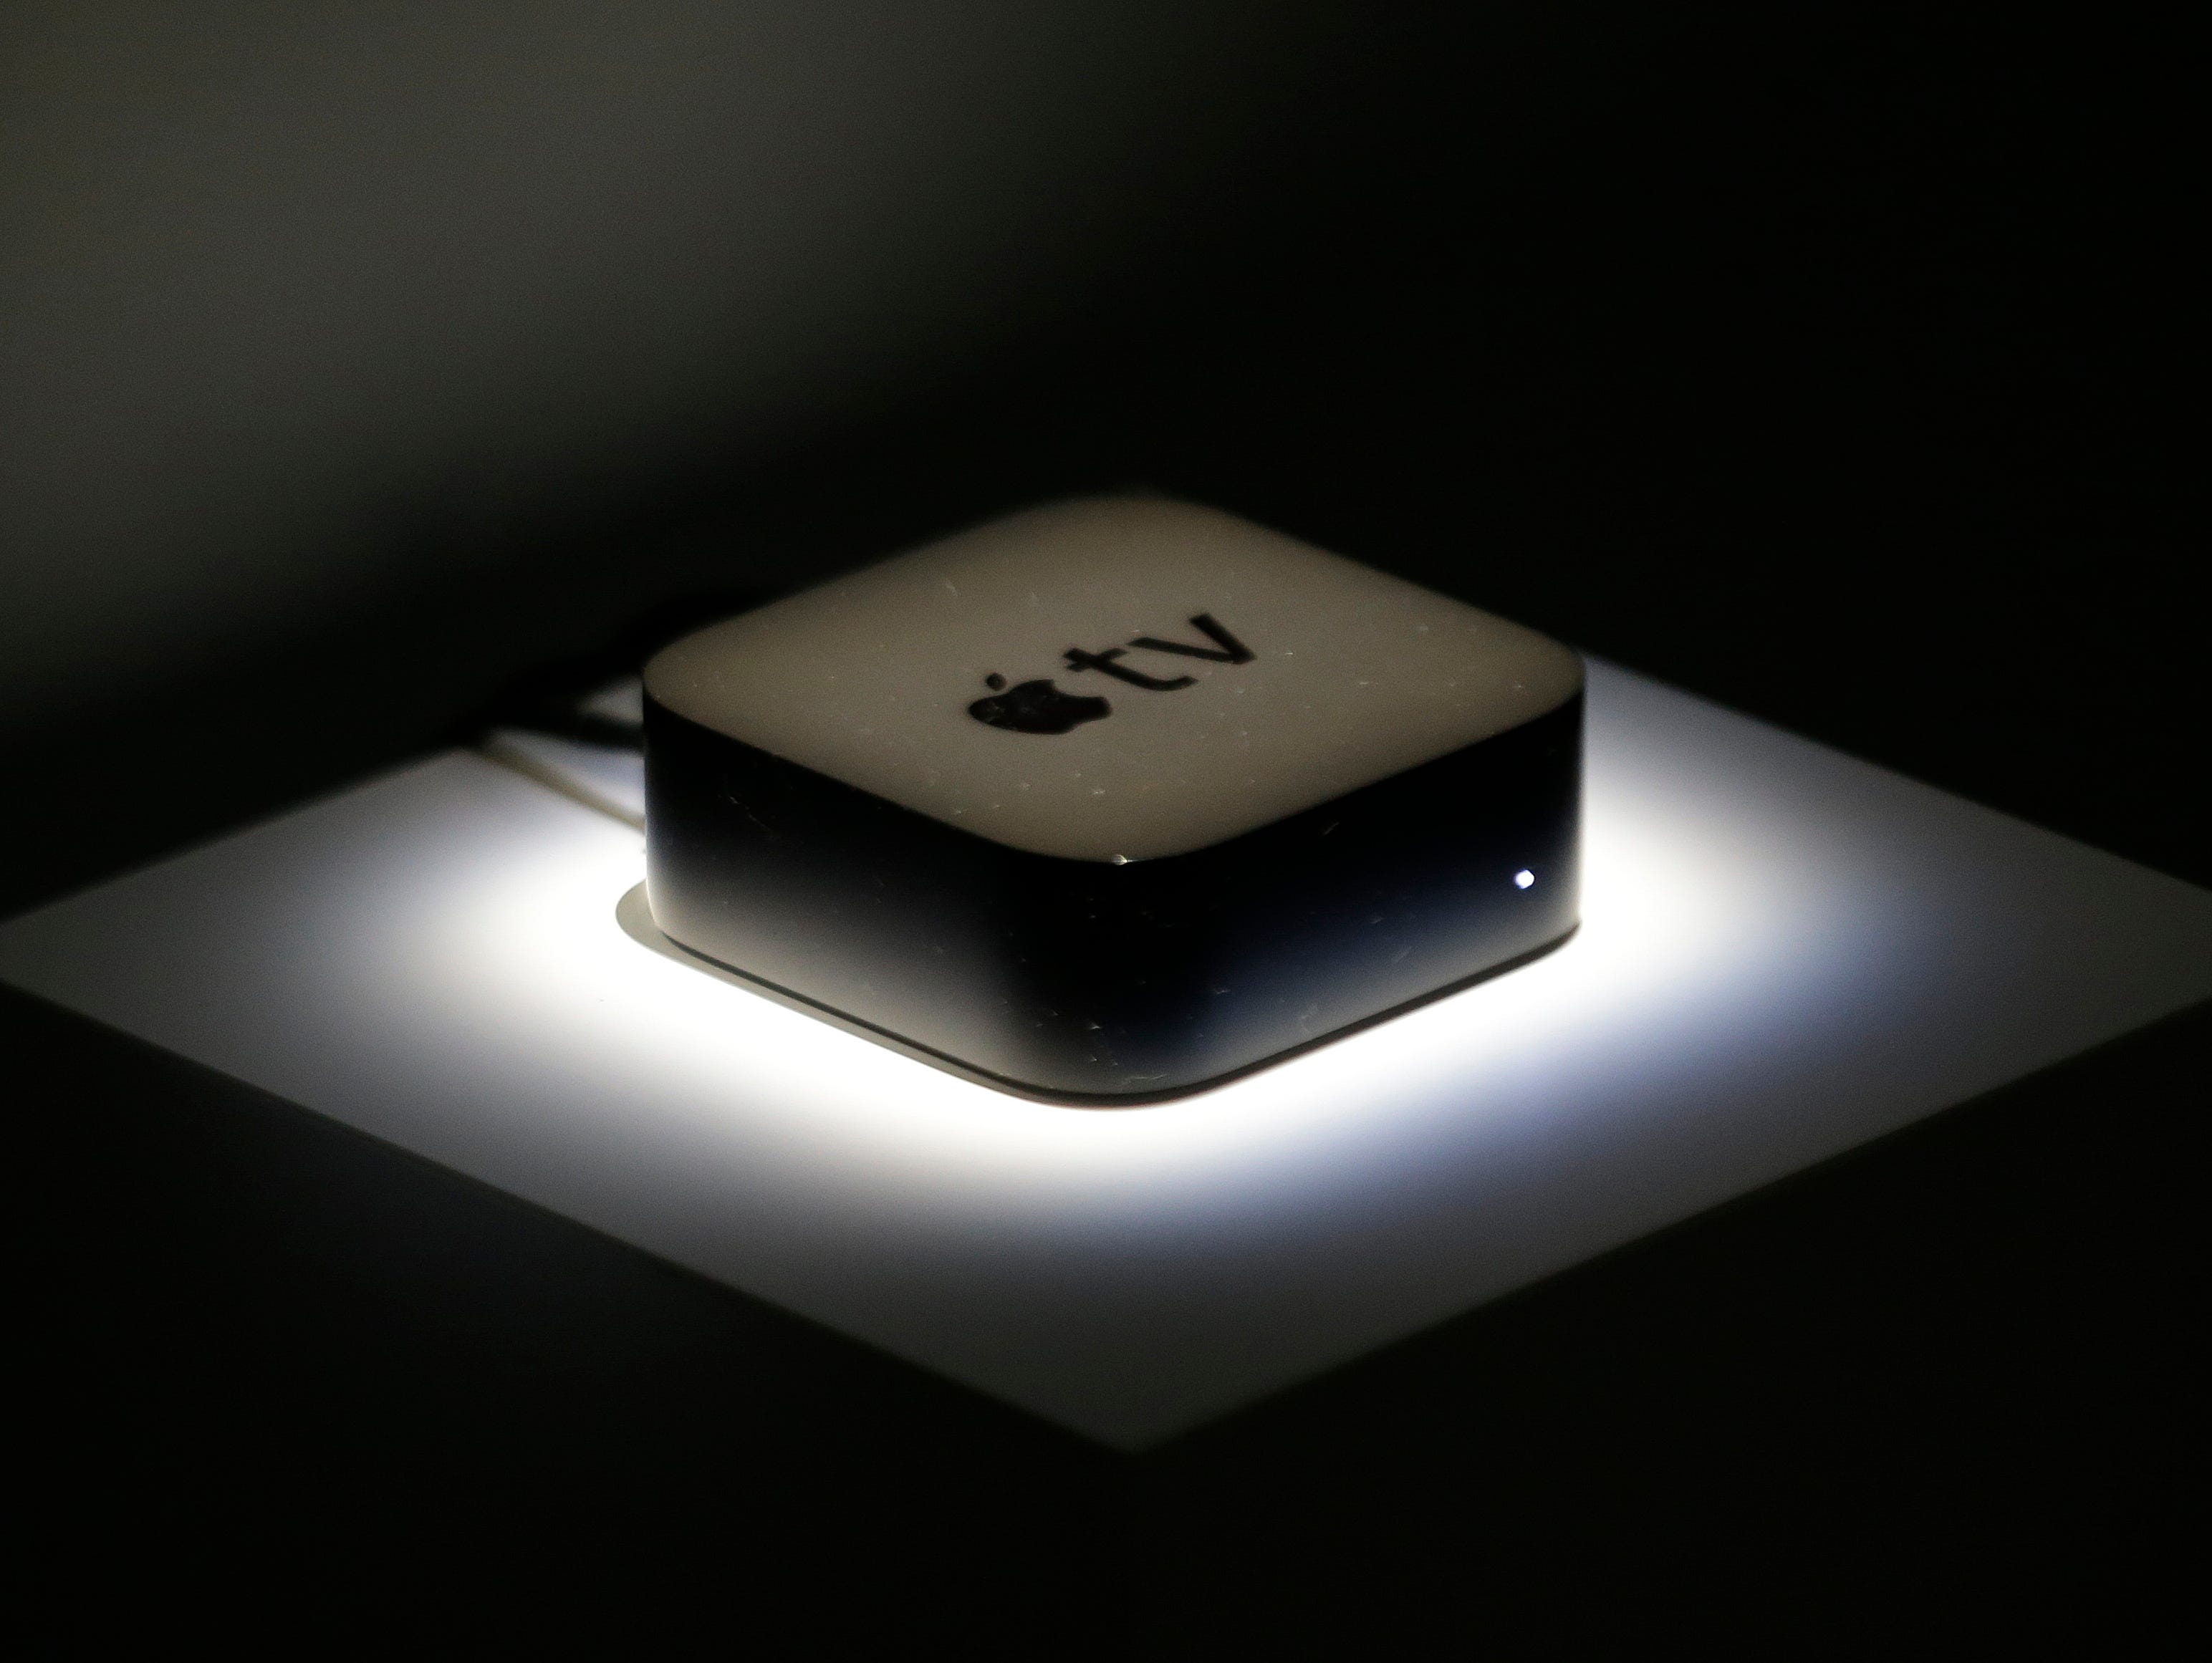 The new Apple TV box is shown during a product display following the Apple event.